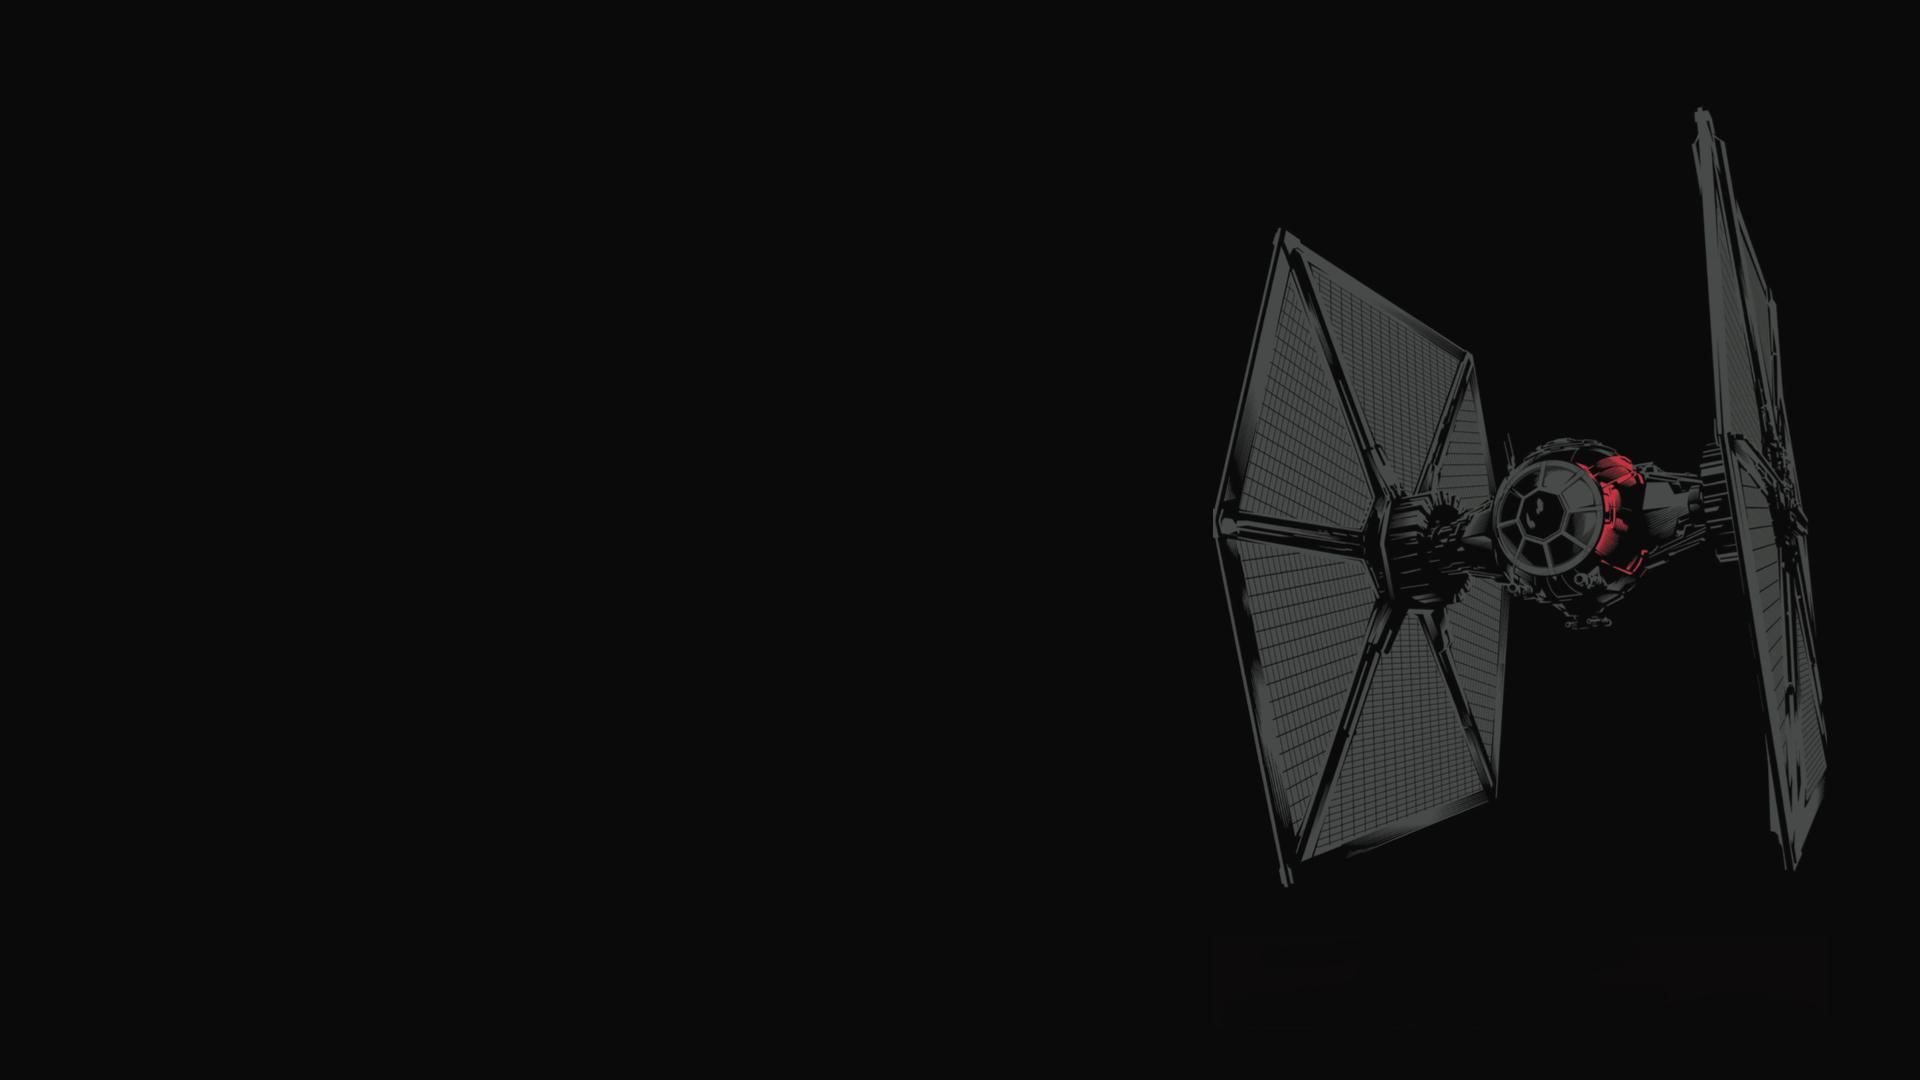 I made a wallpaper out of that TIE Fighter image from the toy leak